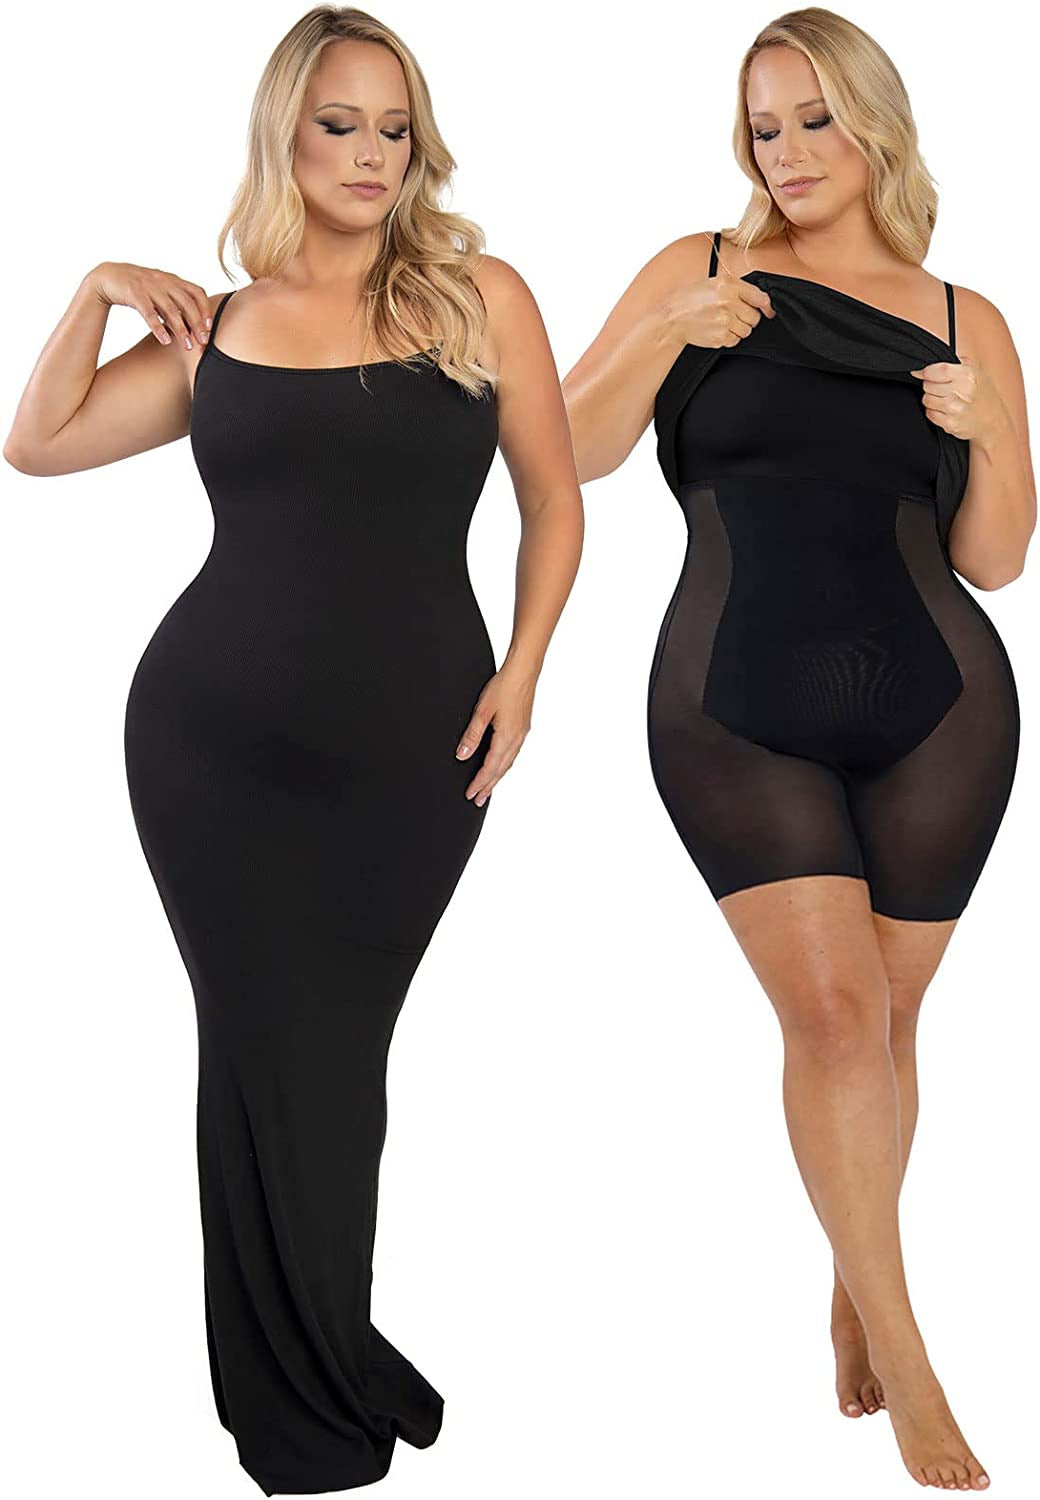 dress, Amazing‼ You must own this Shaping Dress Exclusive❘Built in  Shaper and Bra💕 Get contro l AND comfort all day long!🙌 Get Yours  RISK-FREE👉